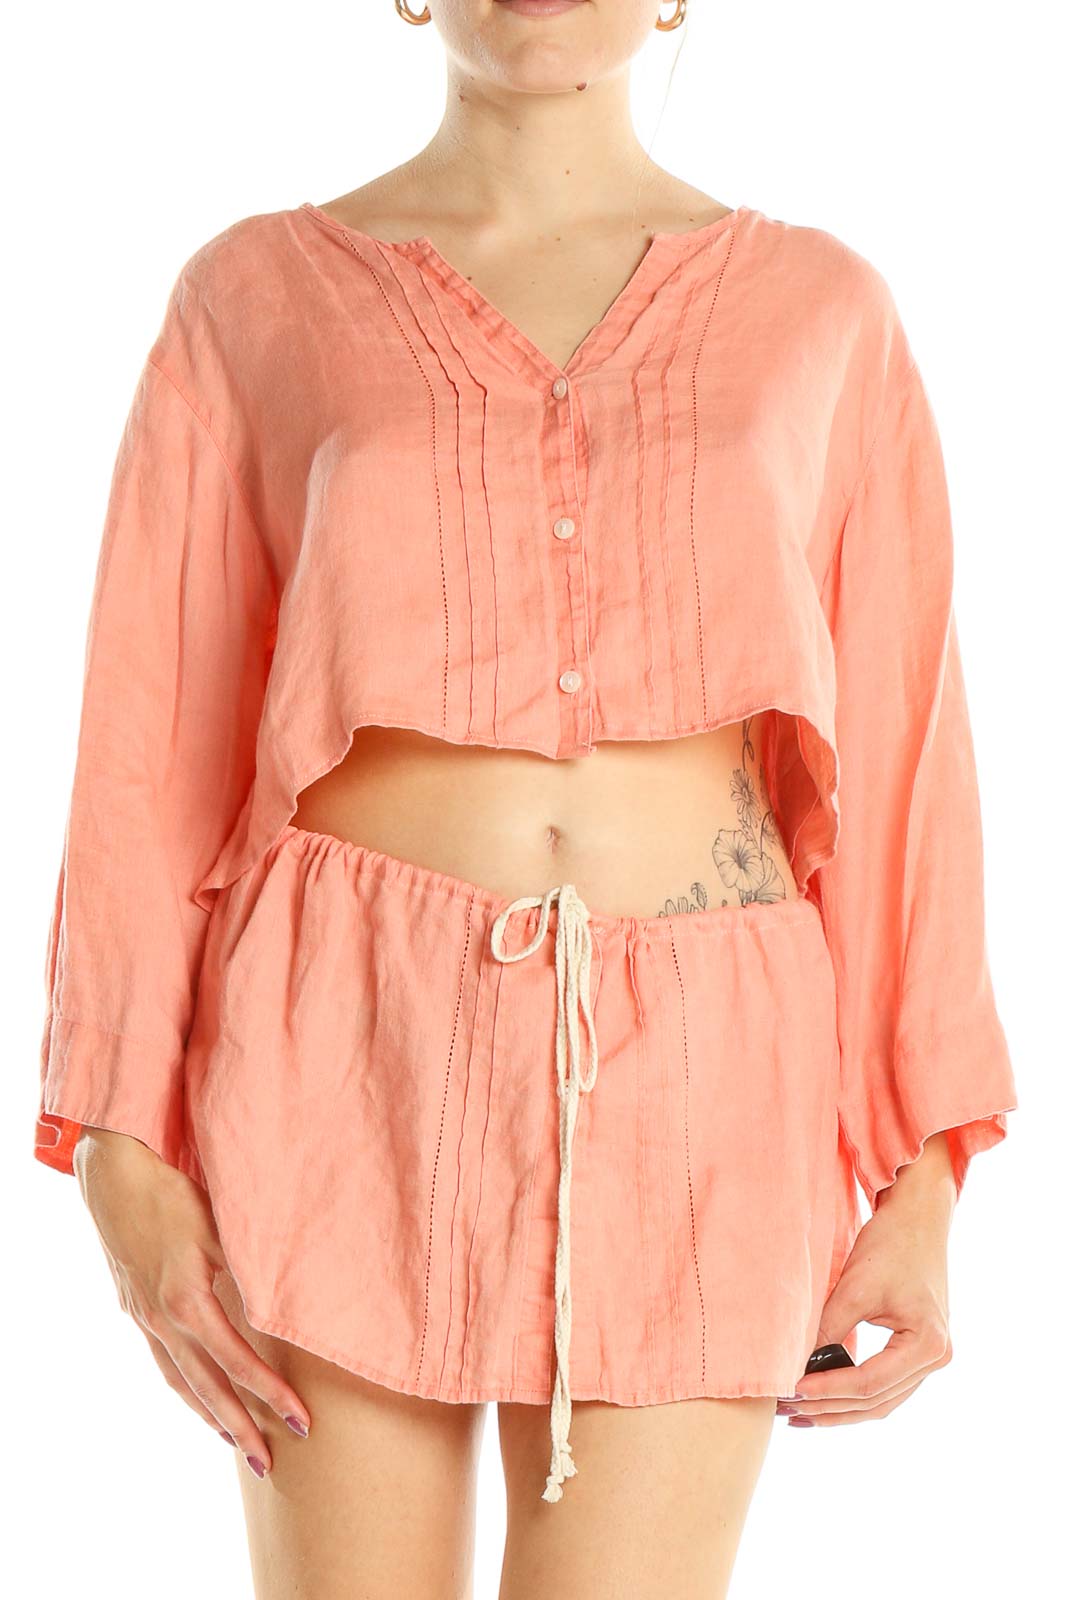 Reworked: Palm Beach top - 100% linen cropped button down Front